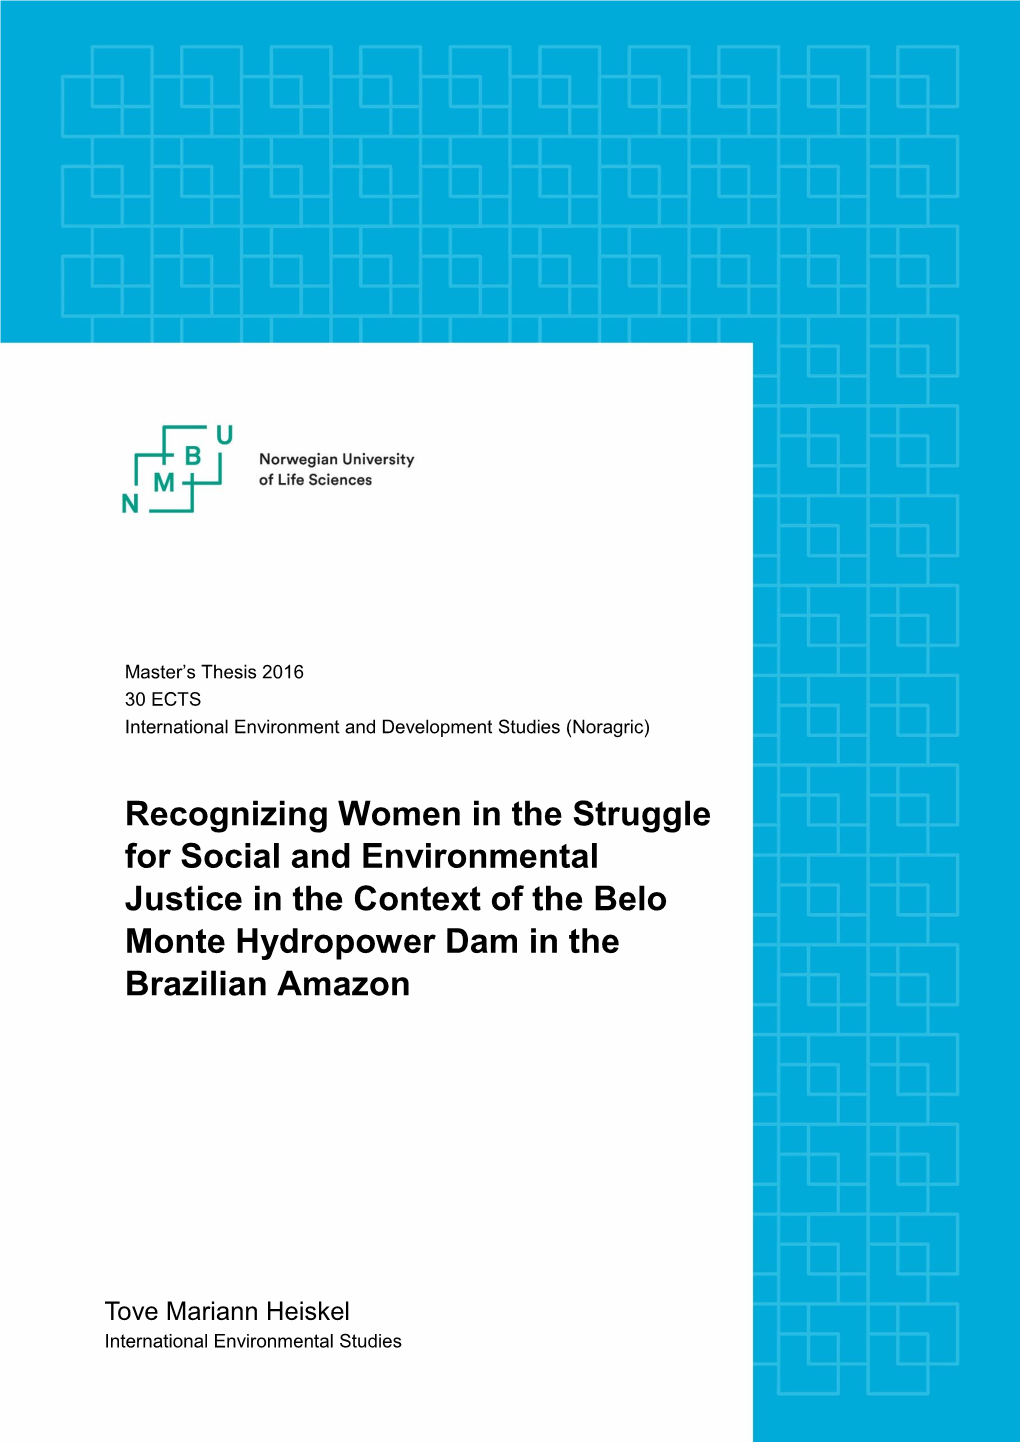 Recognizing Women in the Struggle for Social and Environmental Justice in the Context of the Belo Monte Hydropower Dam in the Brazilian Amazon